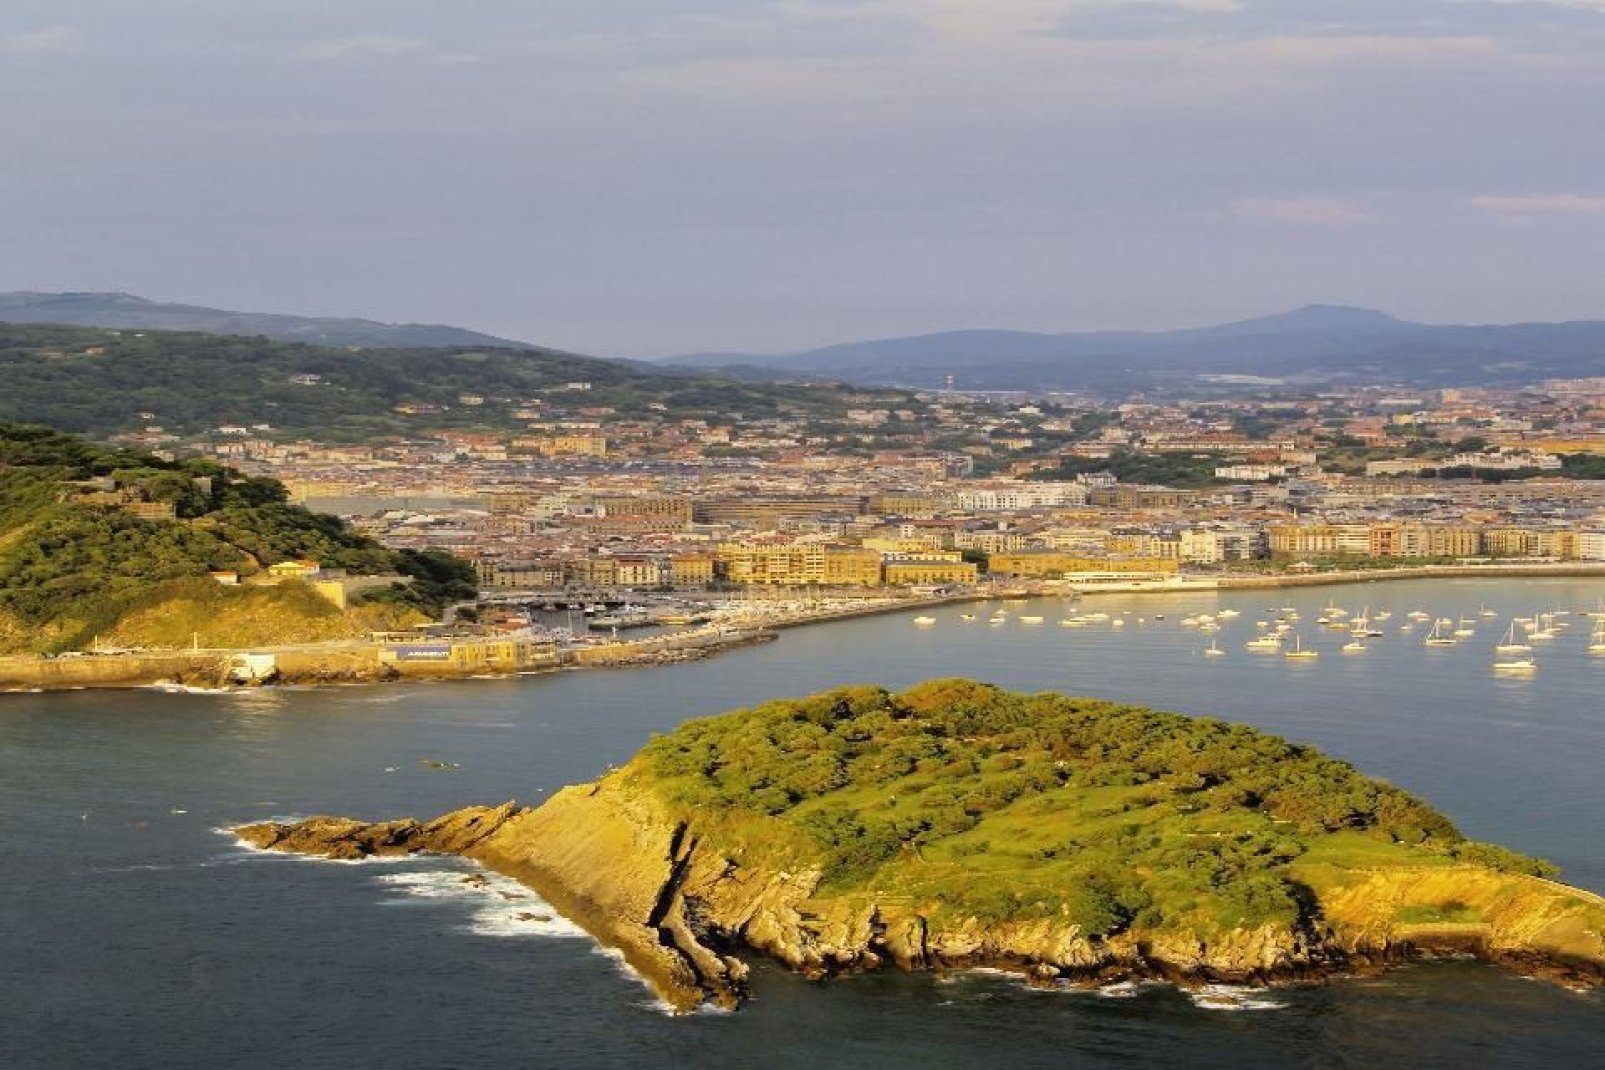 The city of San Sebastian stretches out from the mouth of the Urumea River around a bay dominated by Mounts Urgull, Igeldo and Ullia, and partly enclosed by Santa Clara Island.